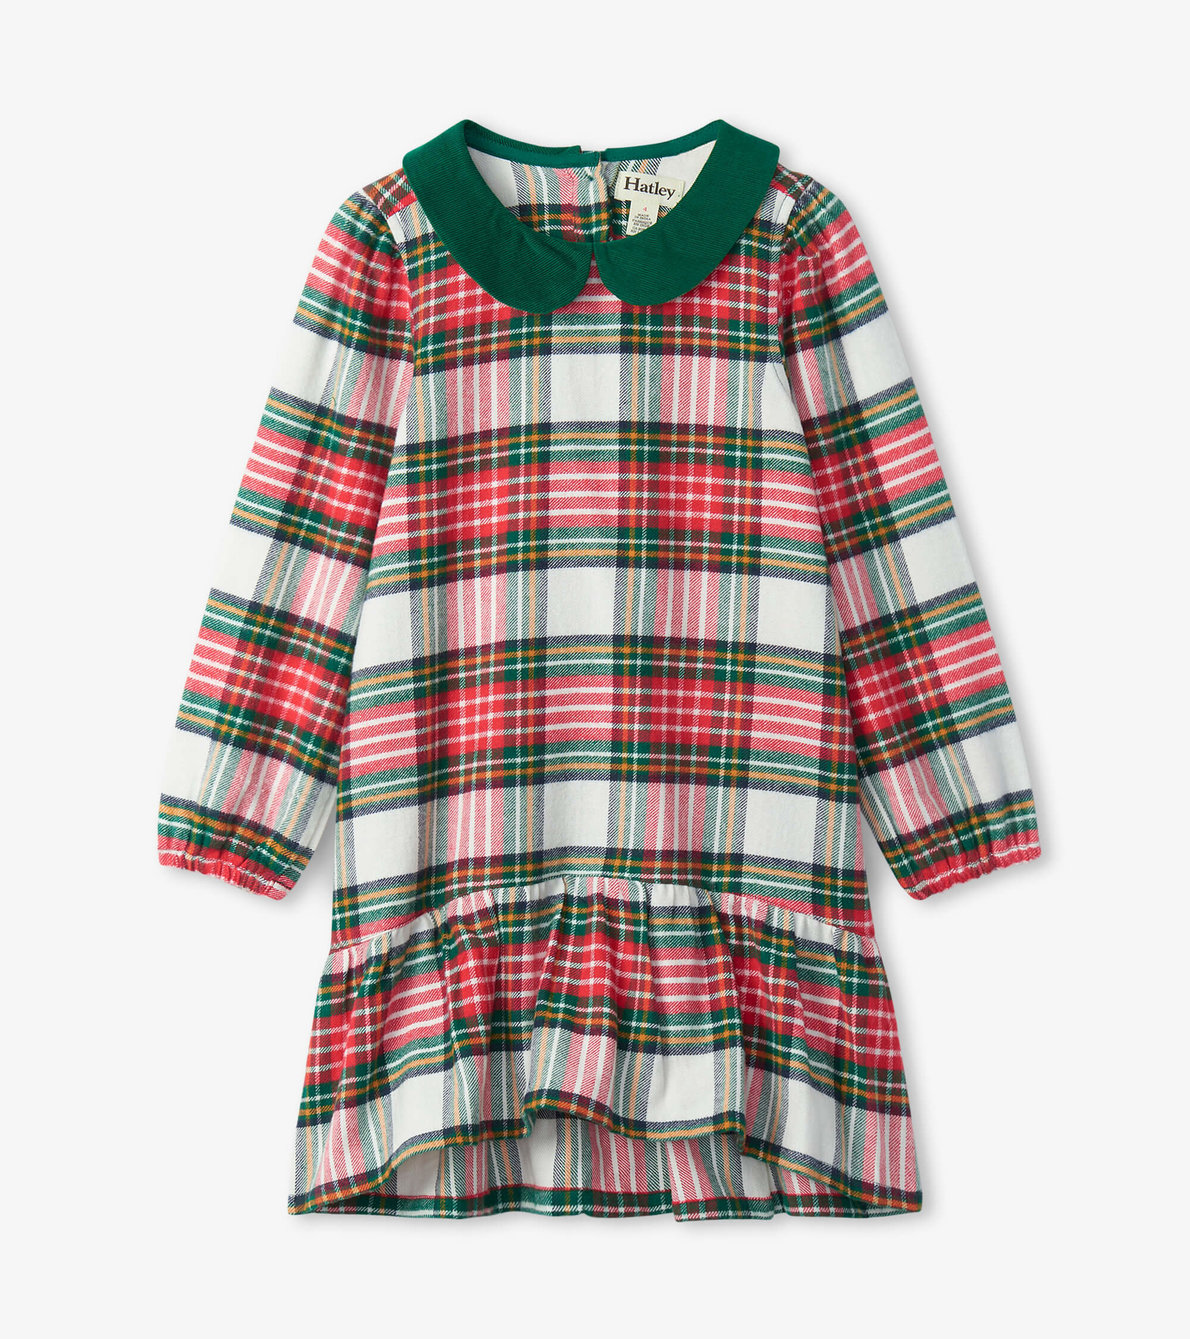 View larger image of Festive Plaid Holiday Dress